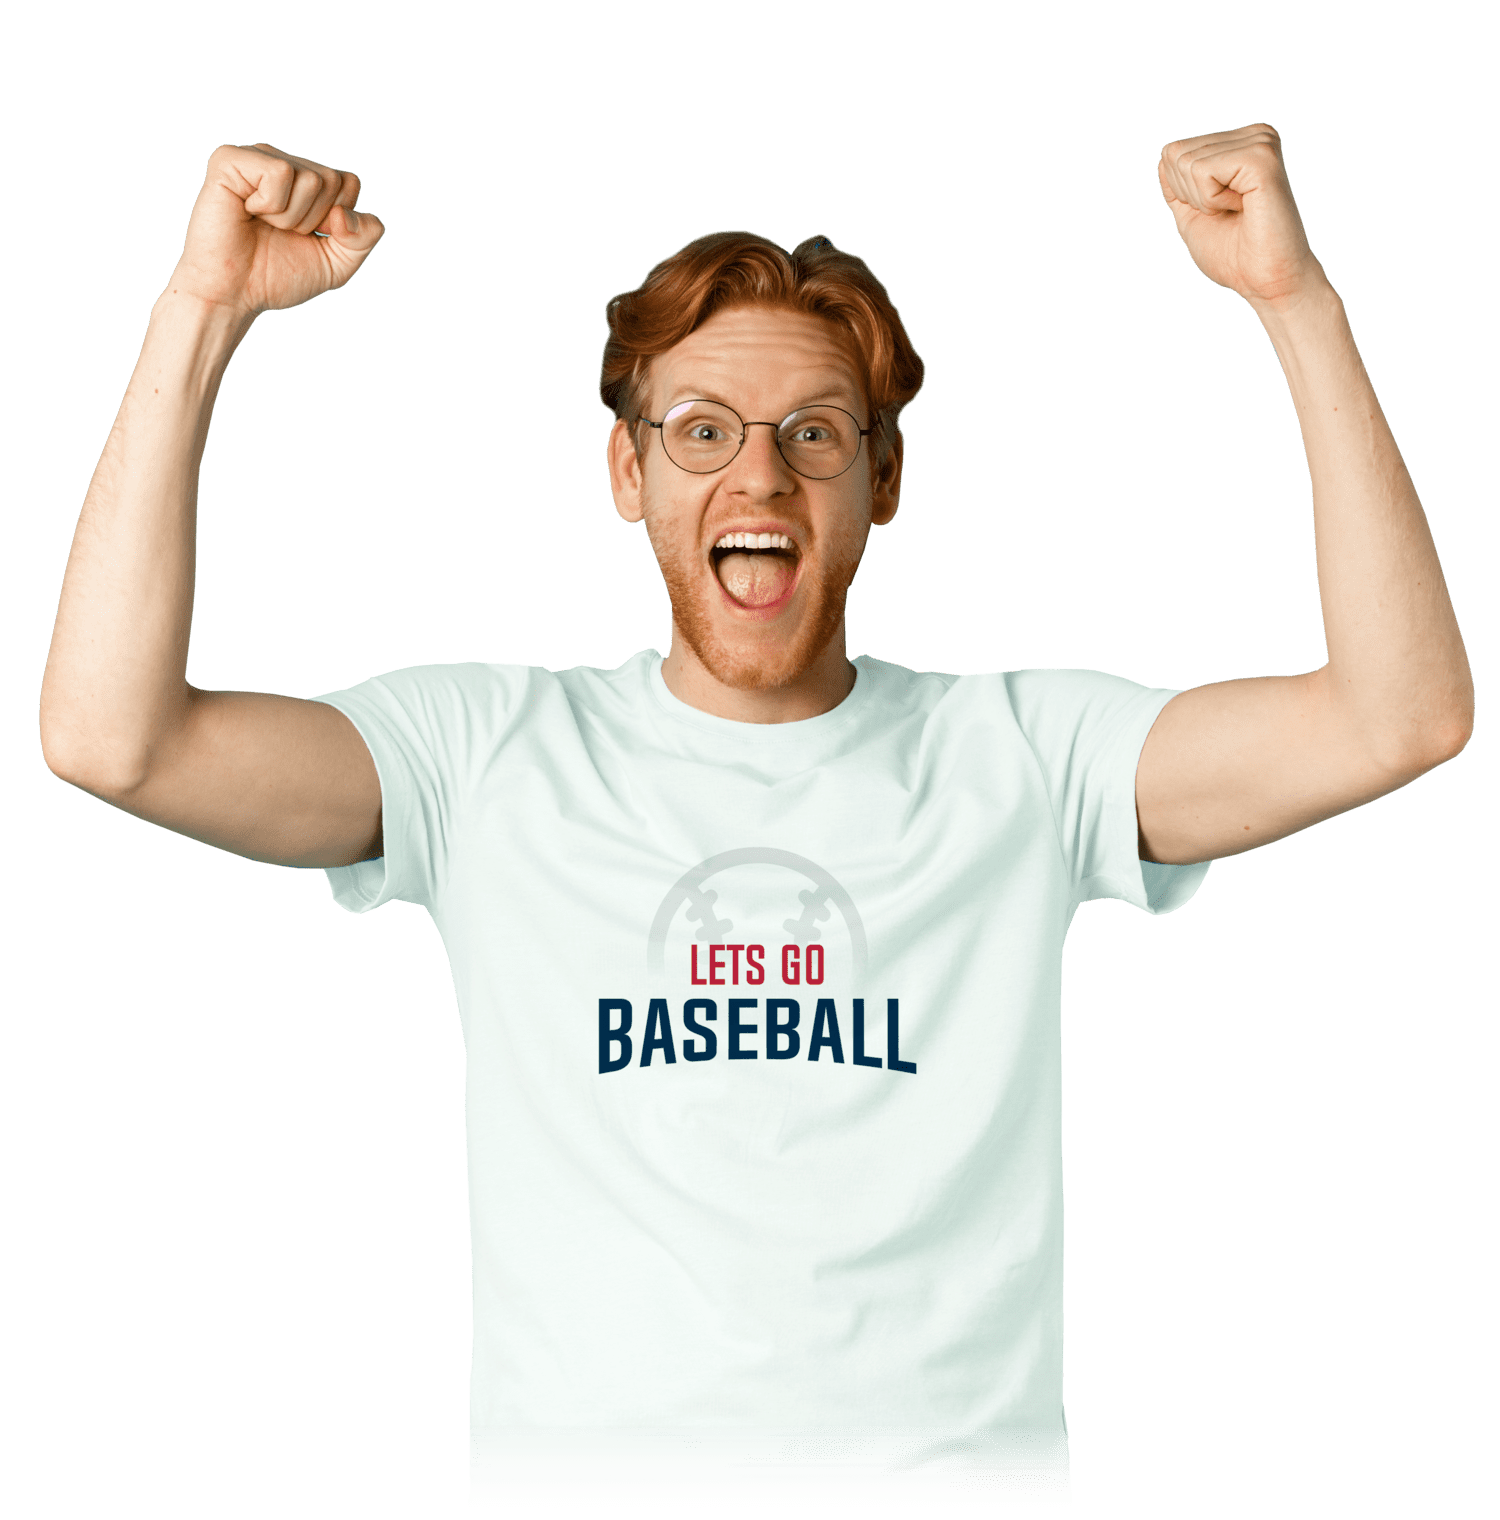 Happily wearing a Let's Go Baseball T-shirt - Let's Go Sports